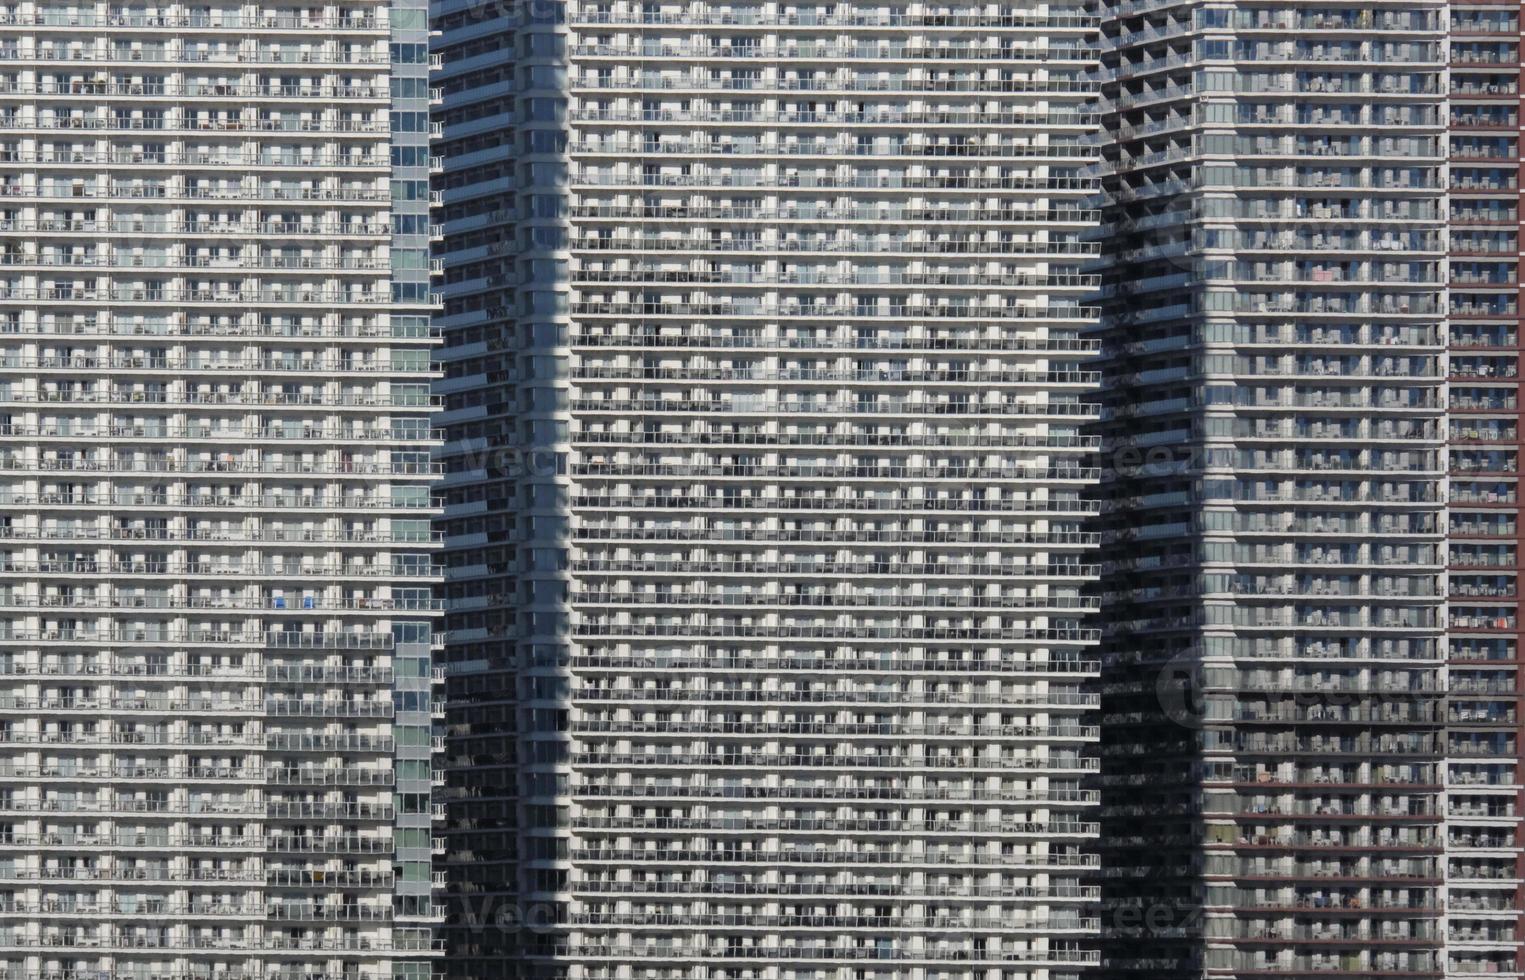 Dense urban living in a row of skyscrapers in Tokyo, Japan photo